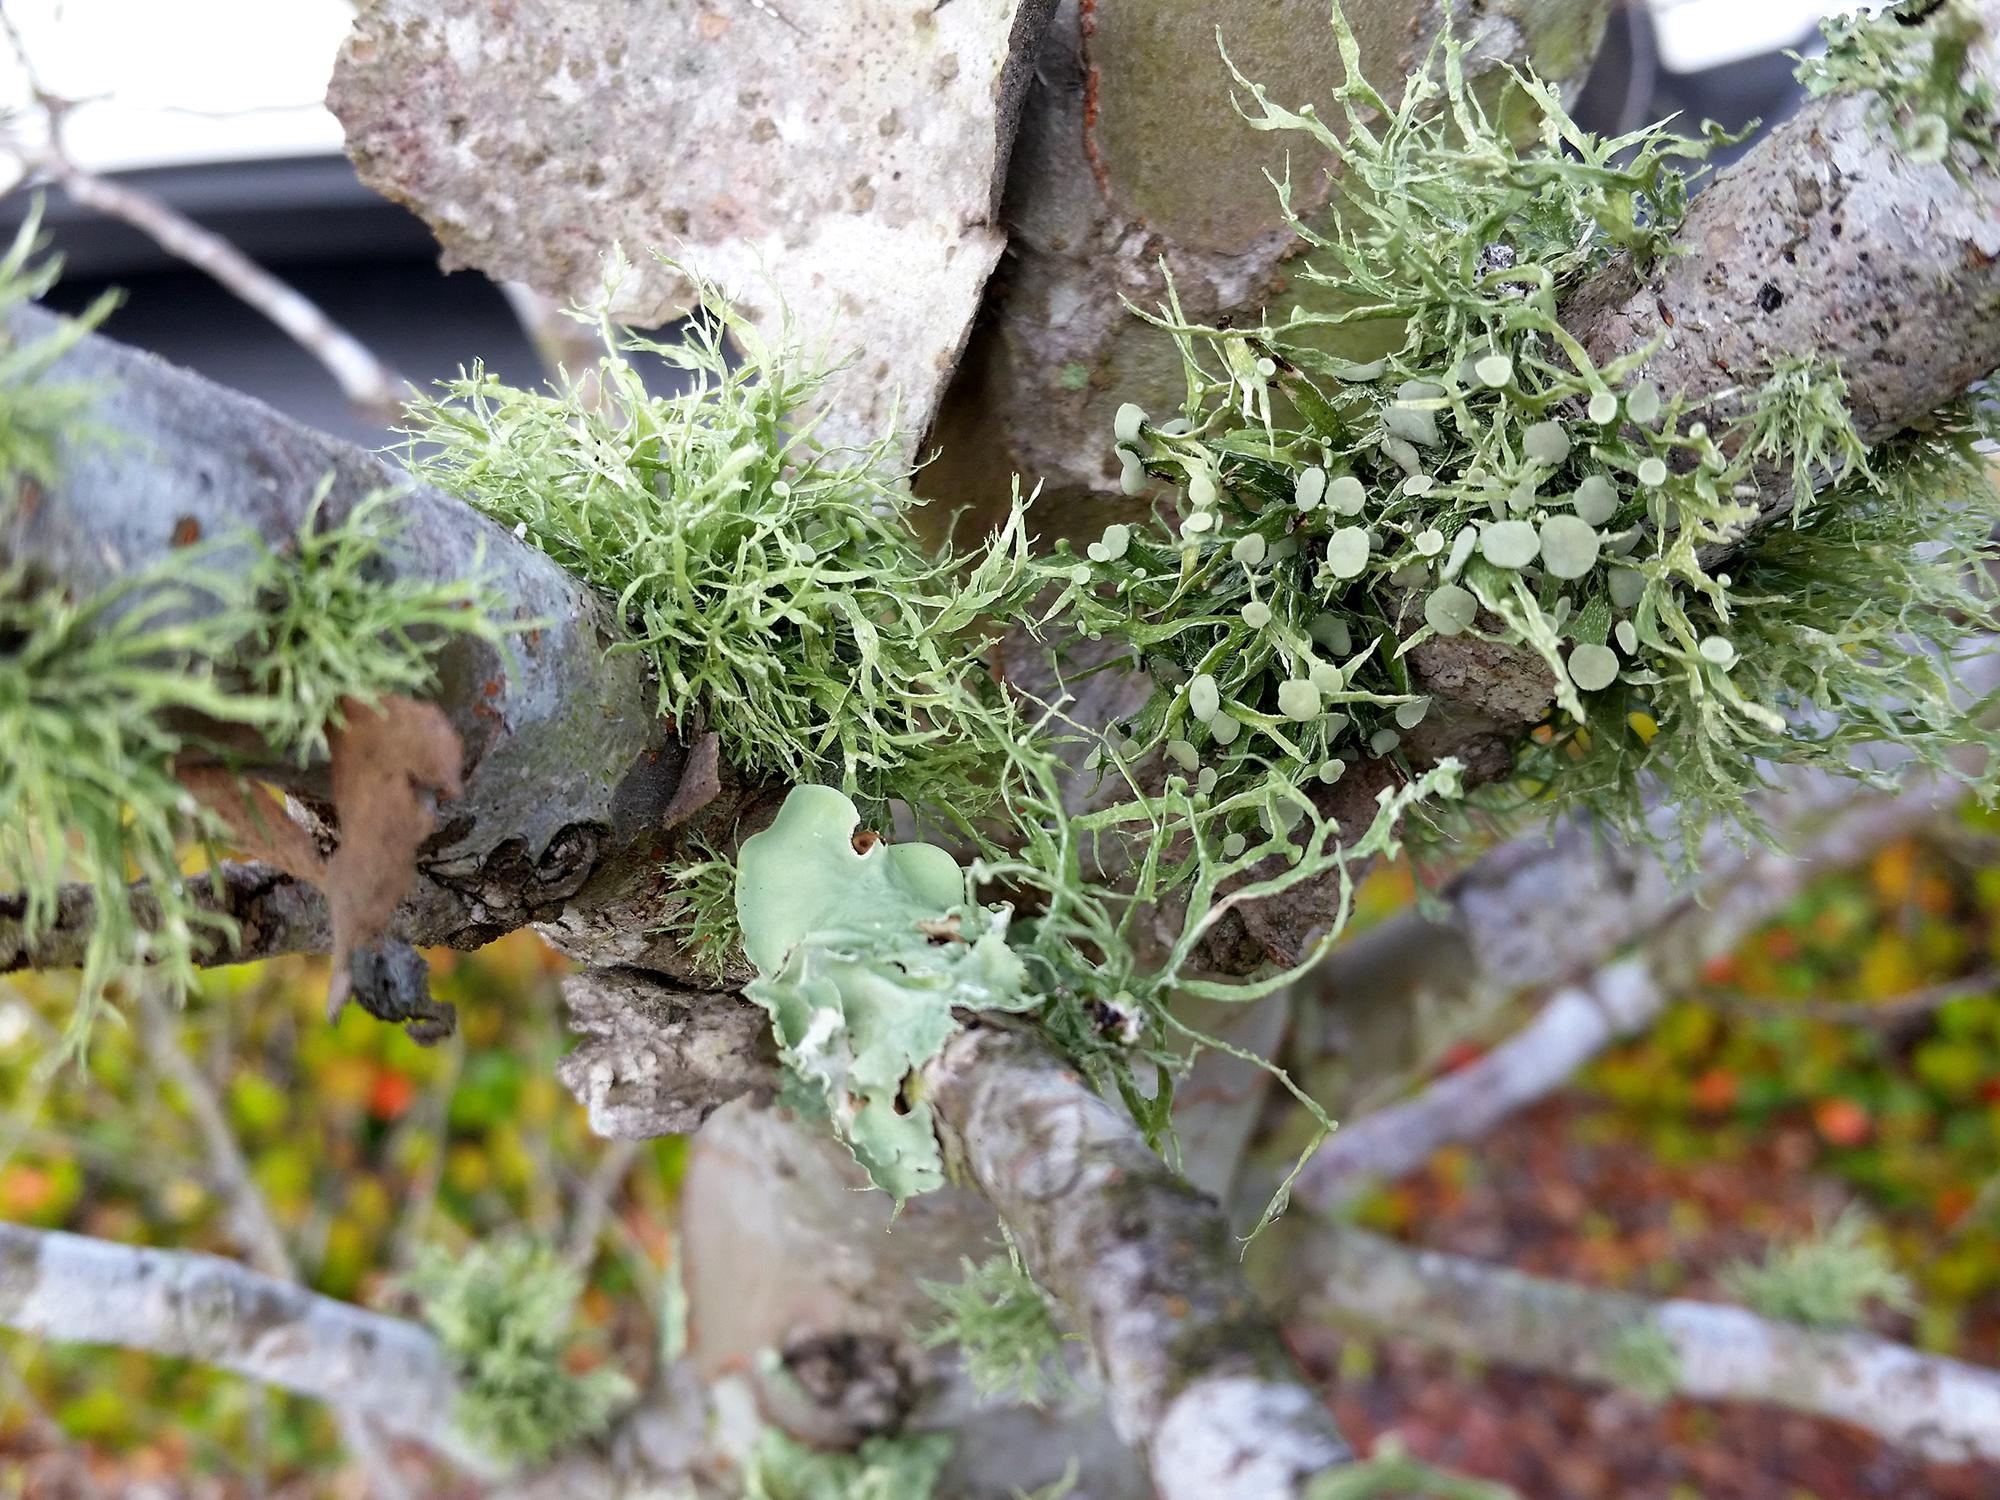 A small tree with leafy green growth on the bark